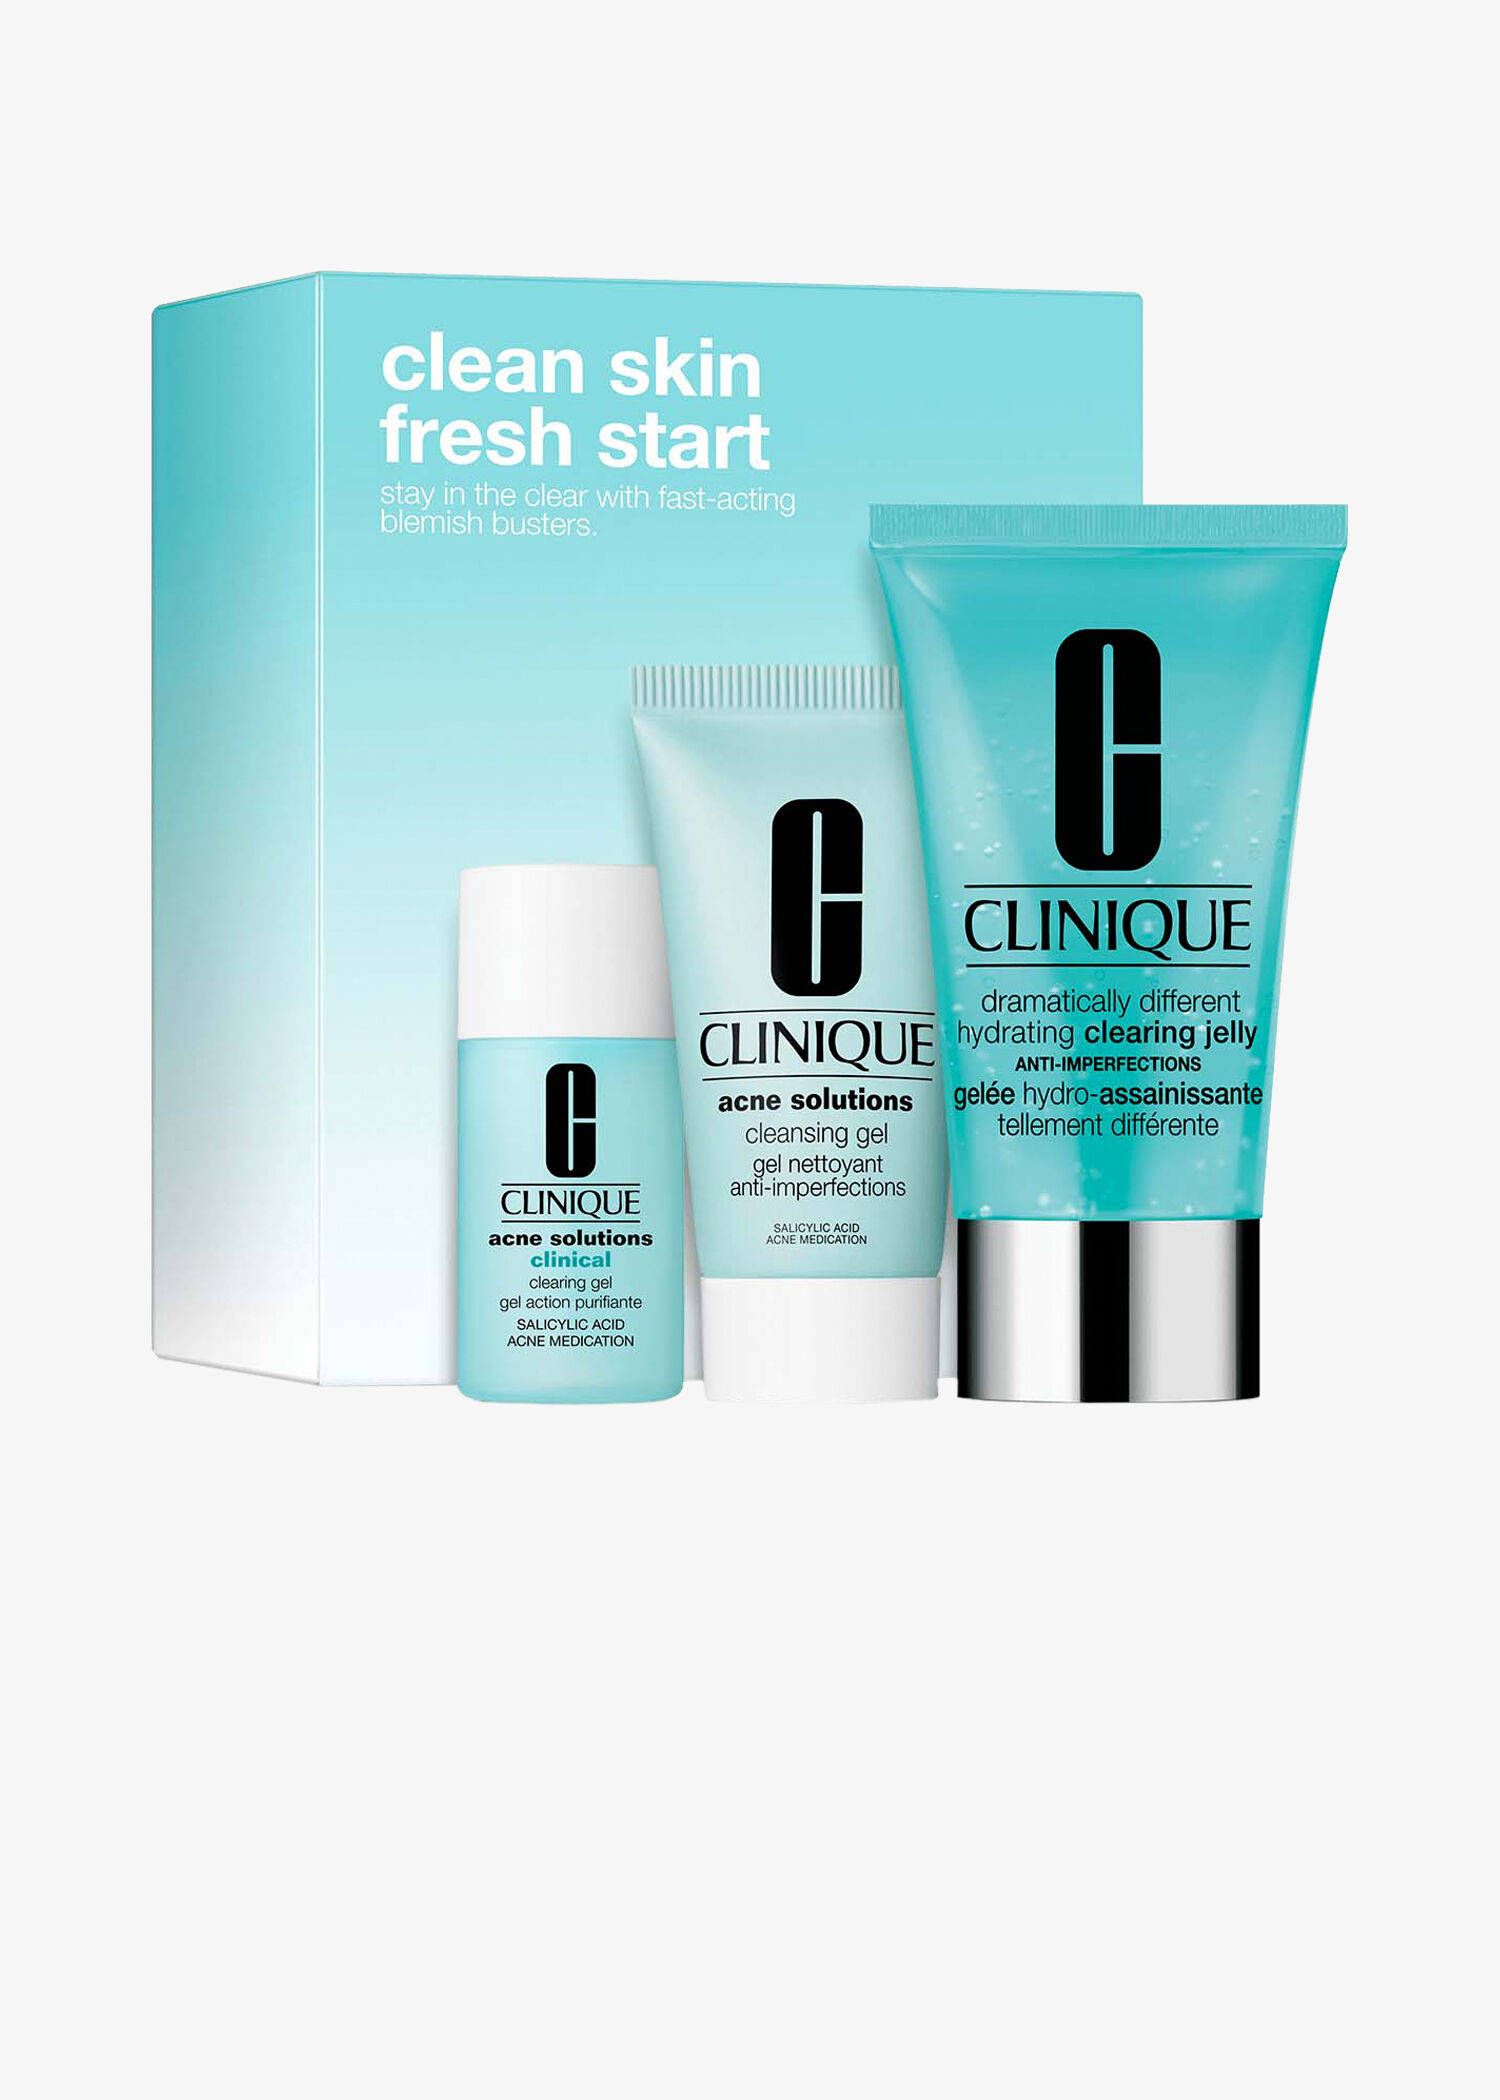 Clean skin отзывы. Anti Blemish solutions Clinique clearing Gel. Clinique acne solutions clearing Gel. Clinique Jelly Gelee. Cleansing by Clinique.